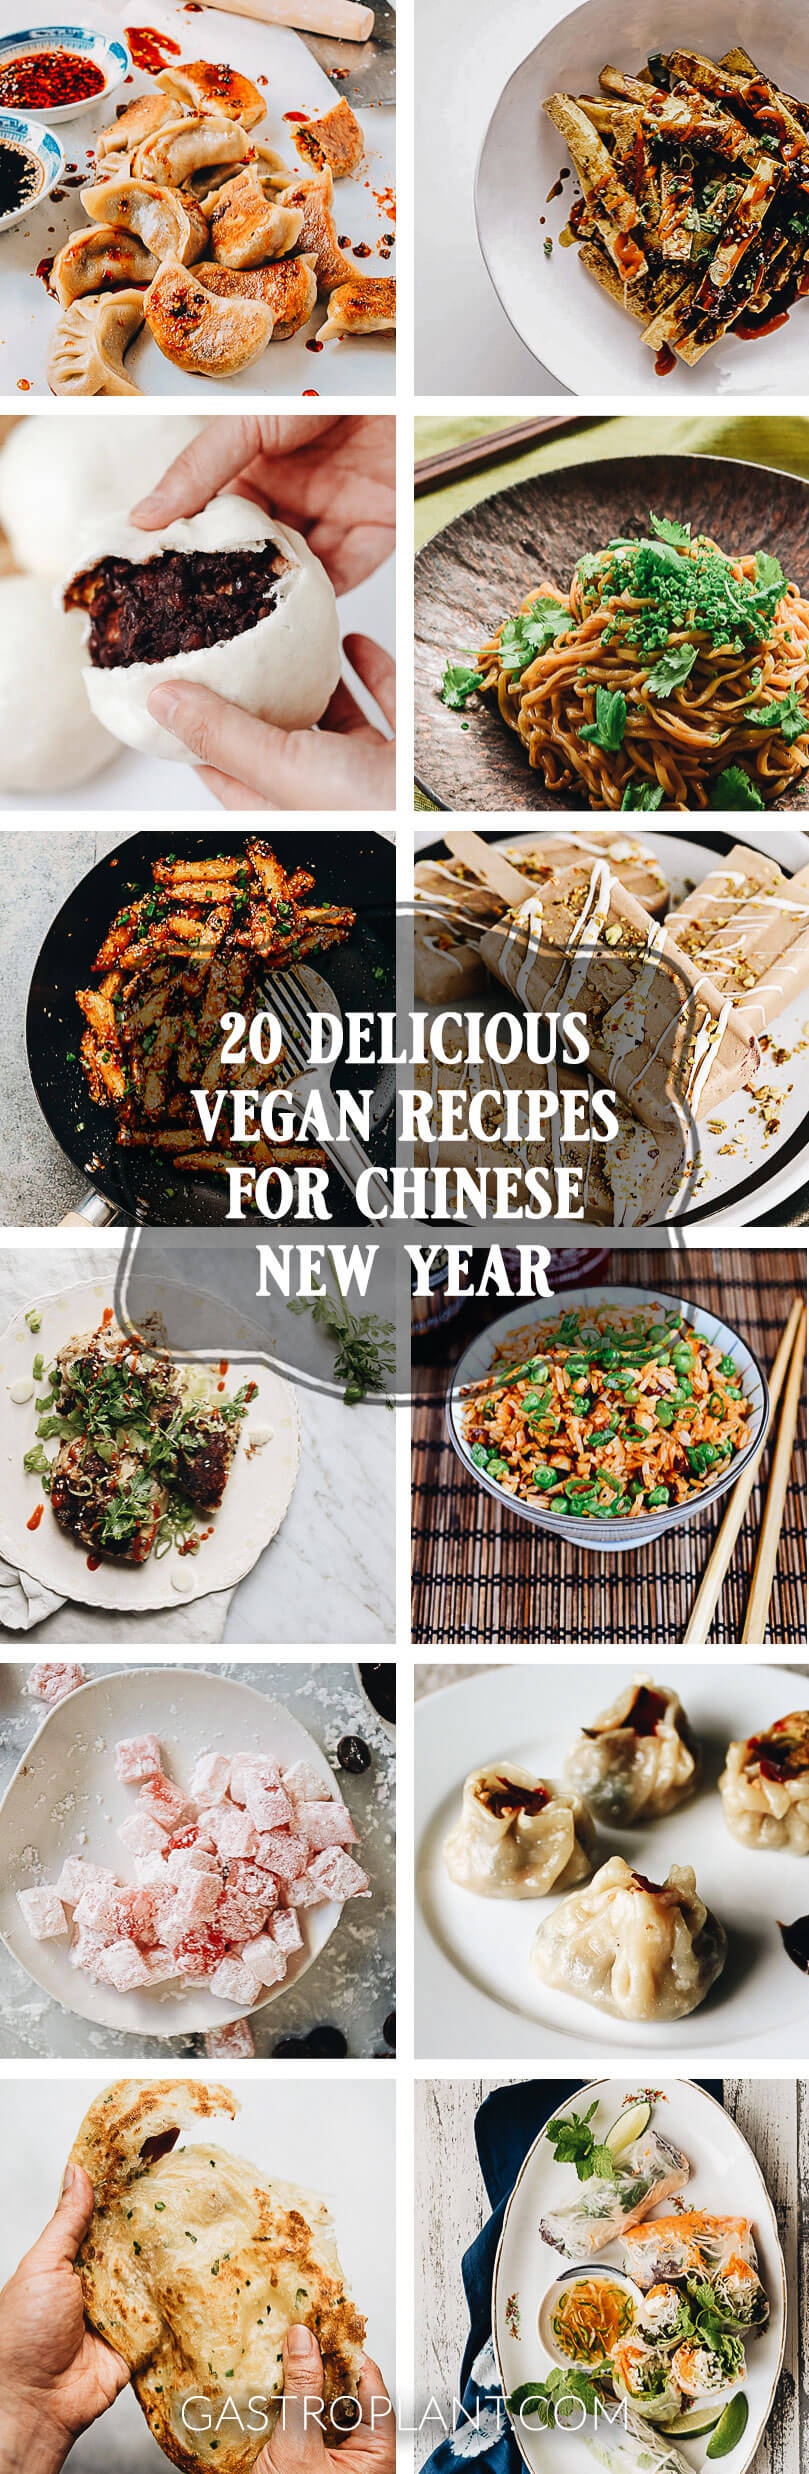 20 Delicious Vegan Recipes for Chinese New Year